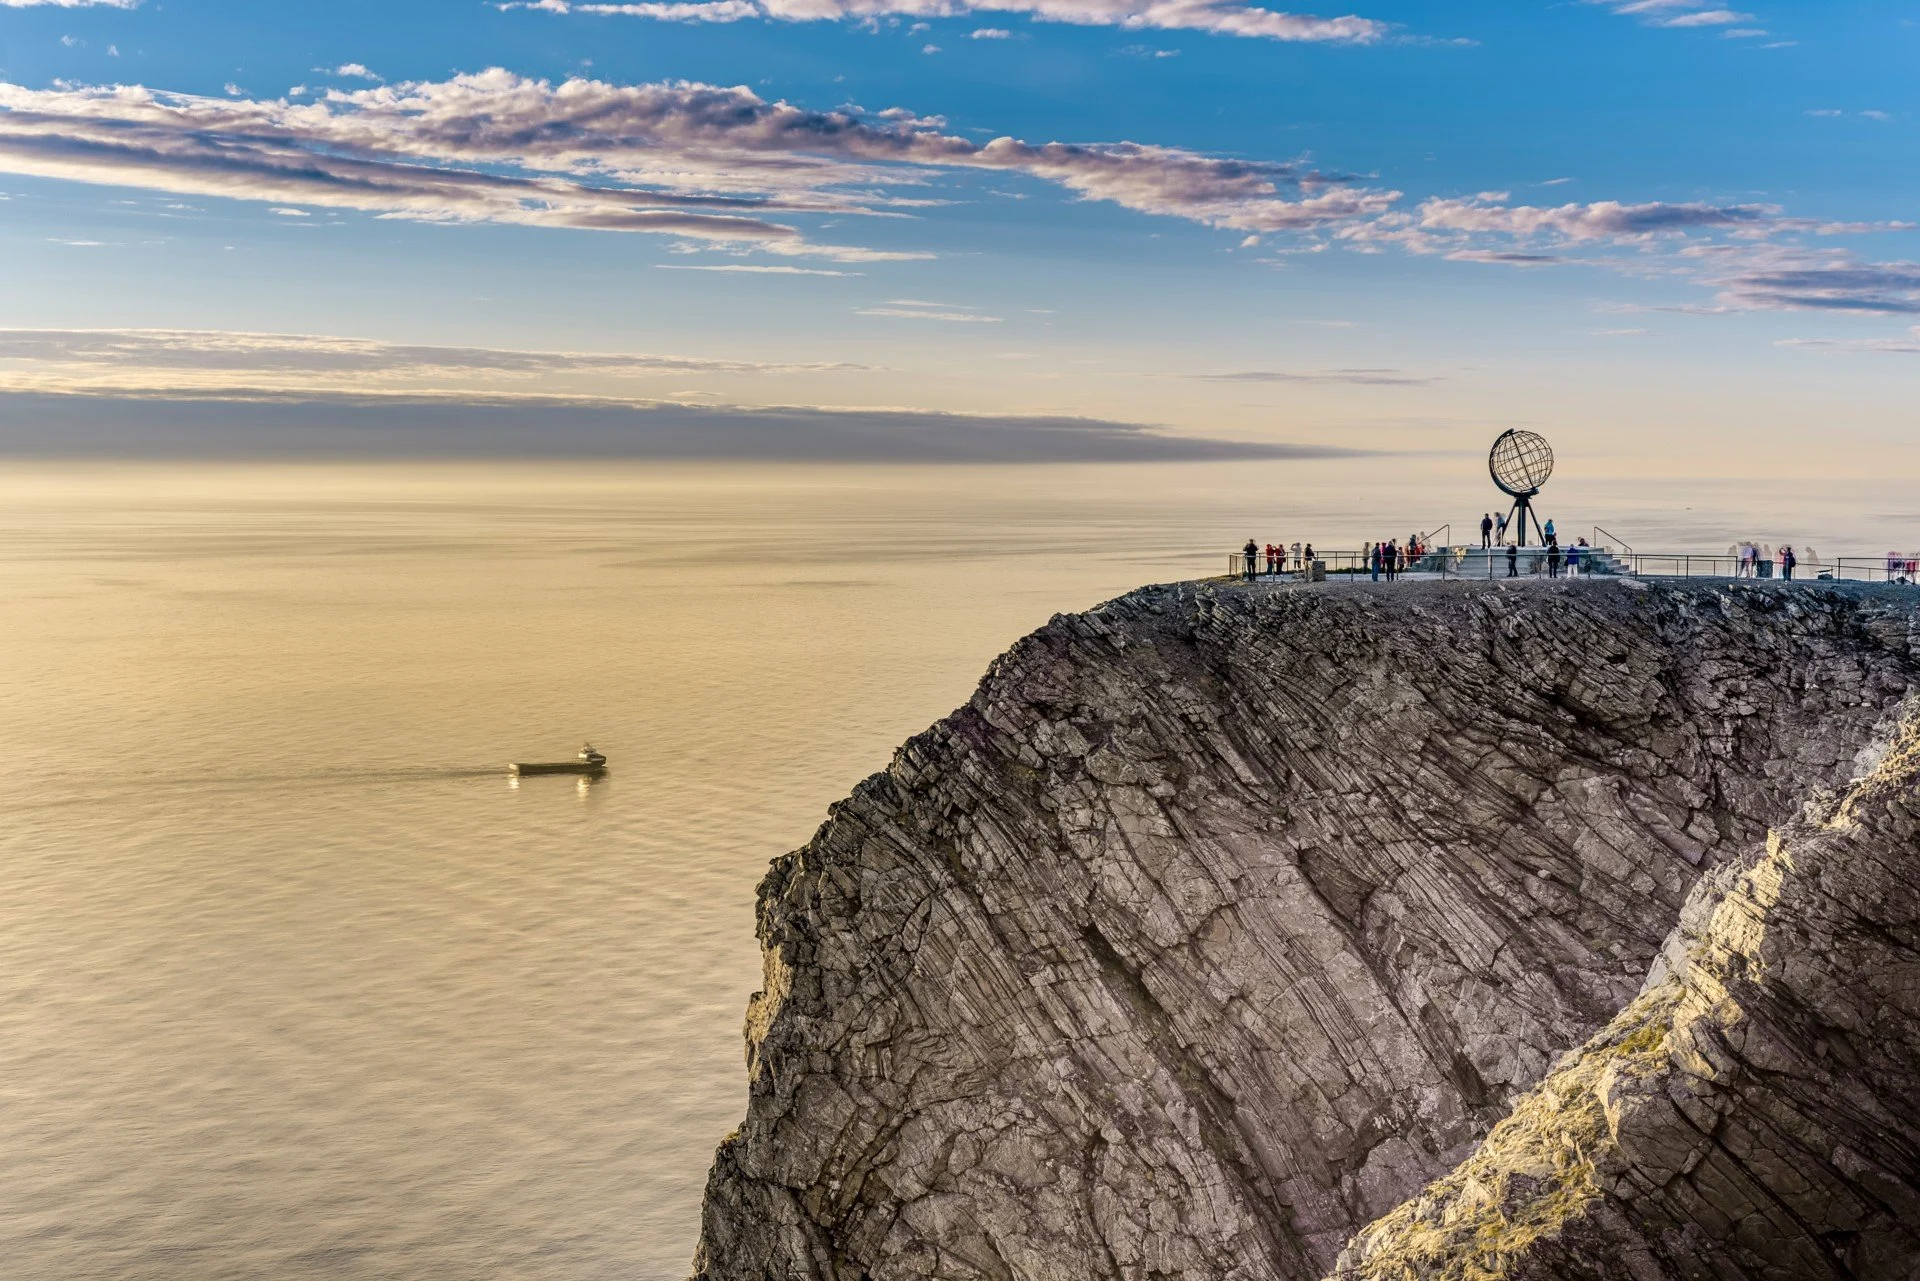 north_cape_norway_hgr_155093_1920_photo_shutterstock